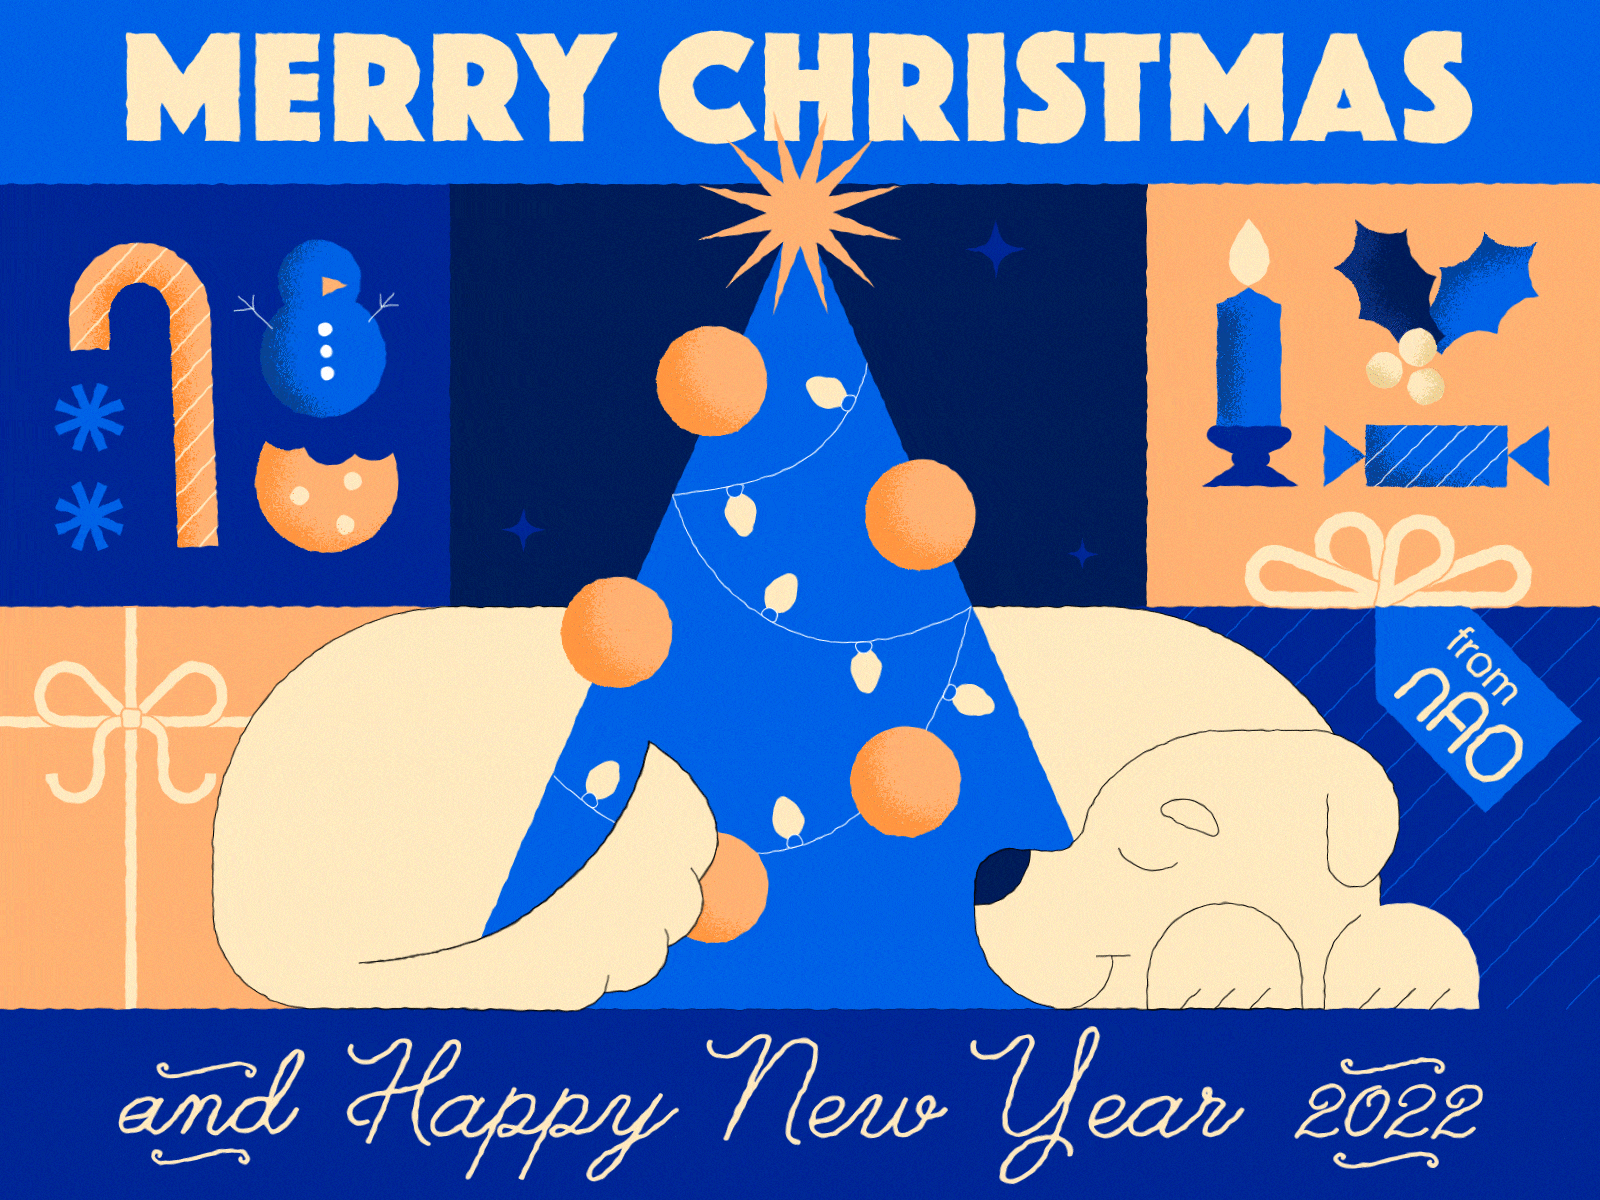 Merry Christmas and Happy New Year animation animation illustration merry christmas minimal new year vector